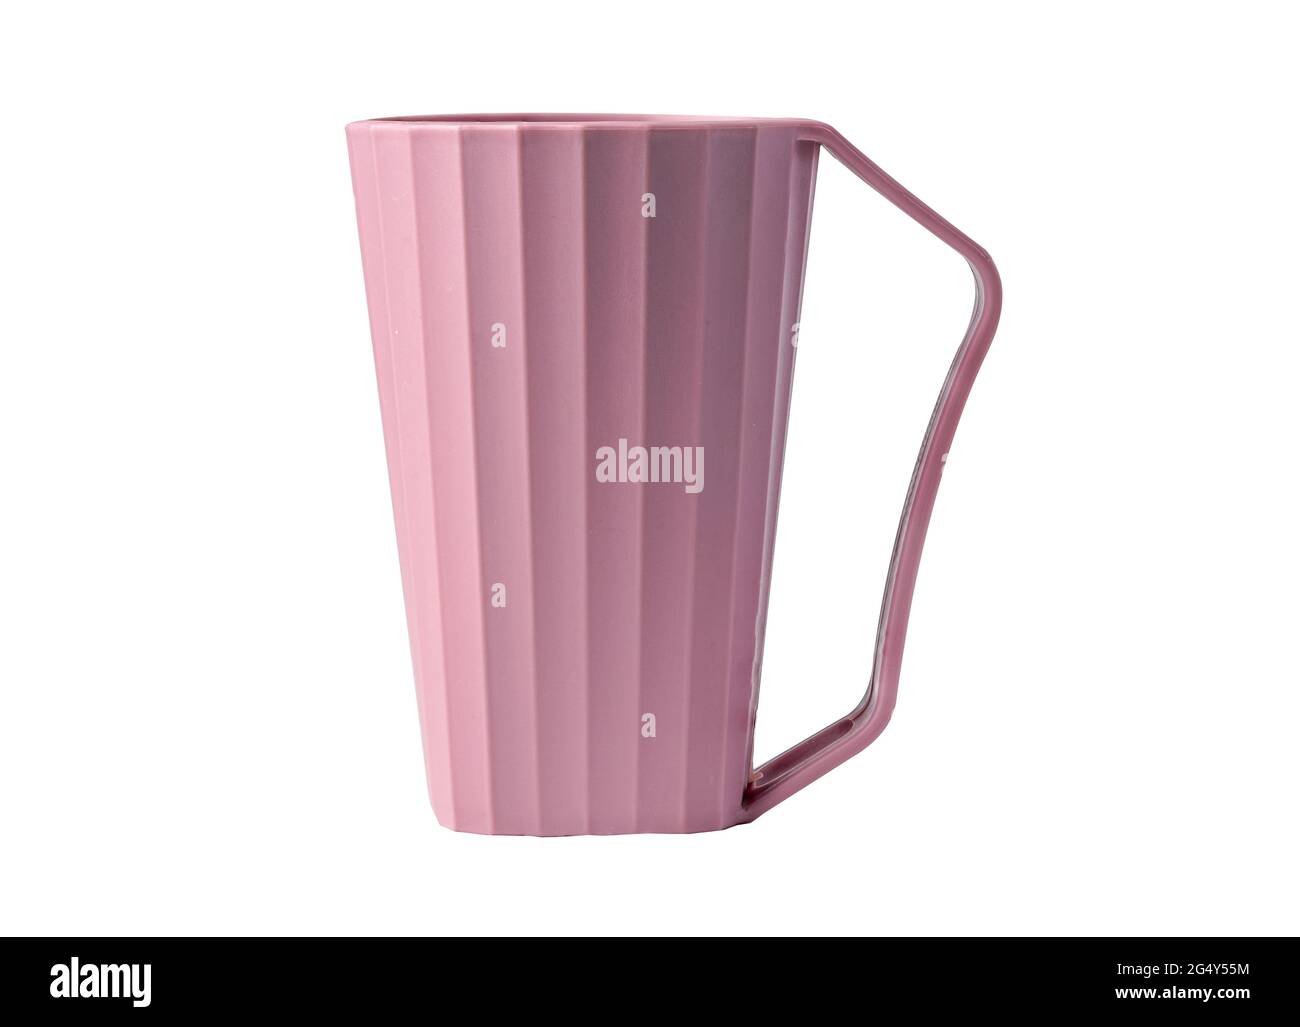 Pink plastic cup isolated on white background with clipping path. Stock Photo